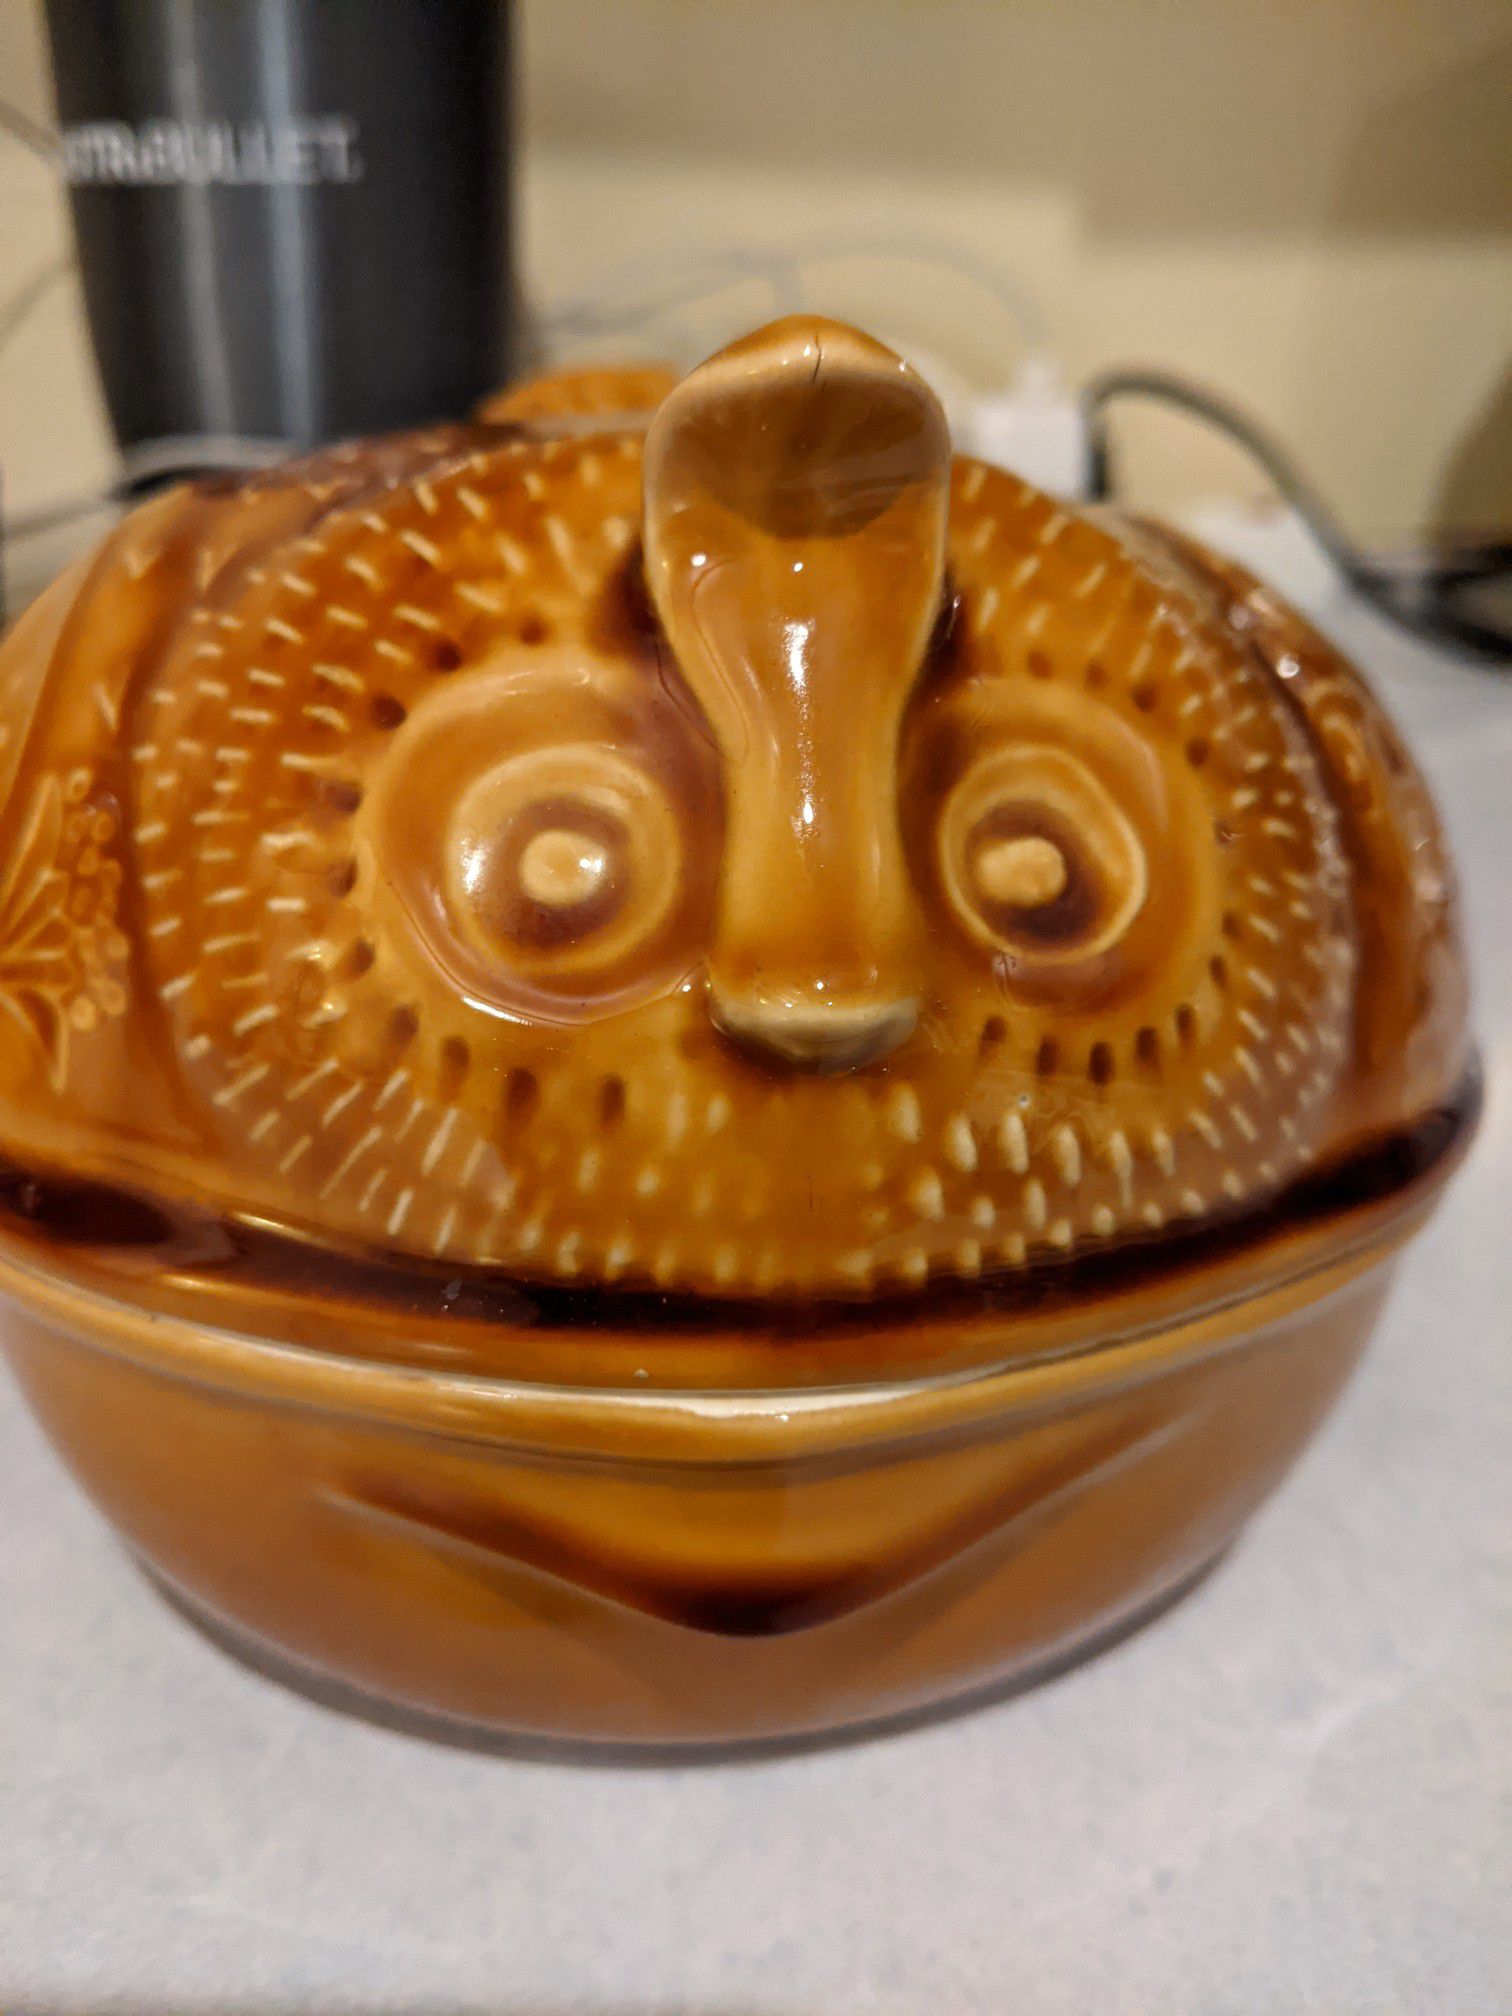 Beautiful Owl Ceramic food container and ice makers